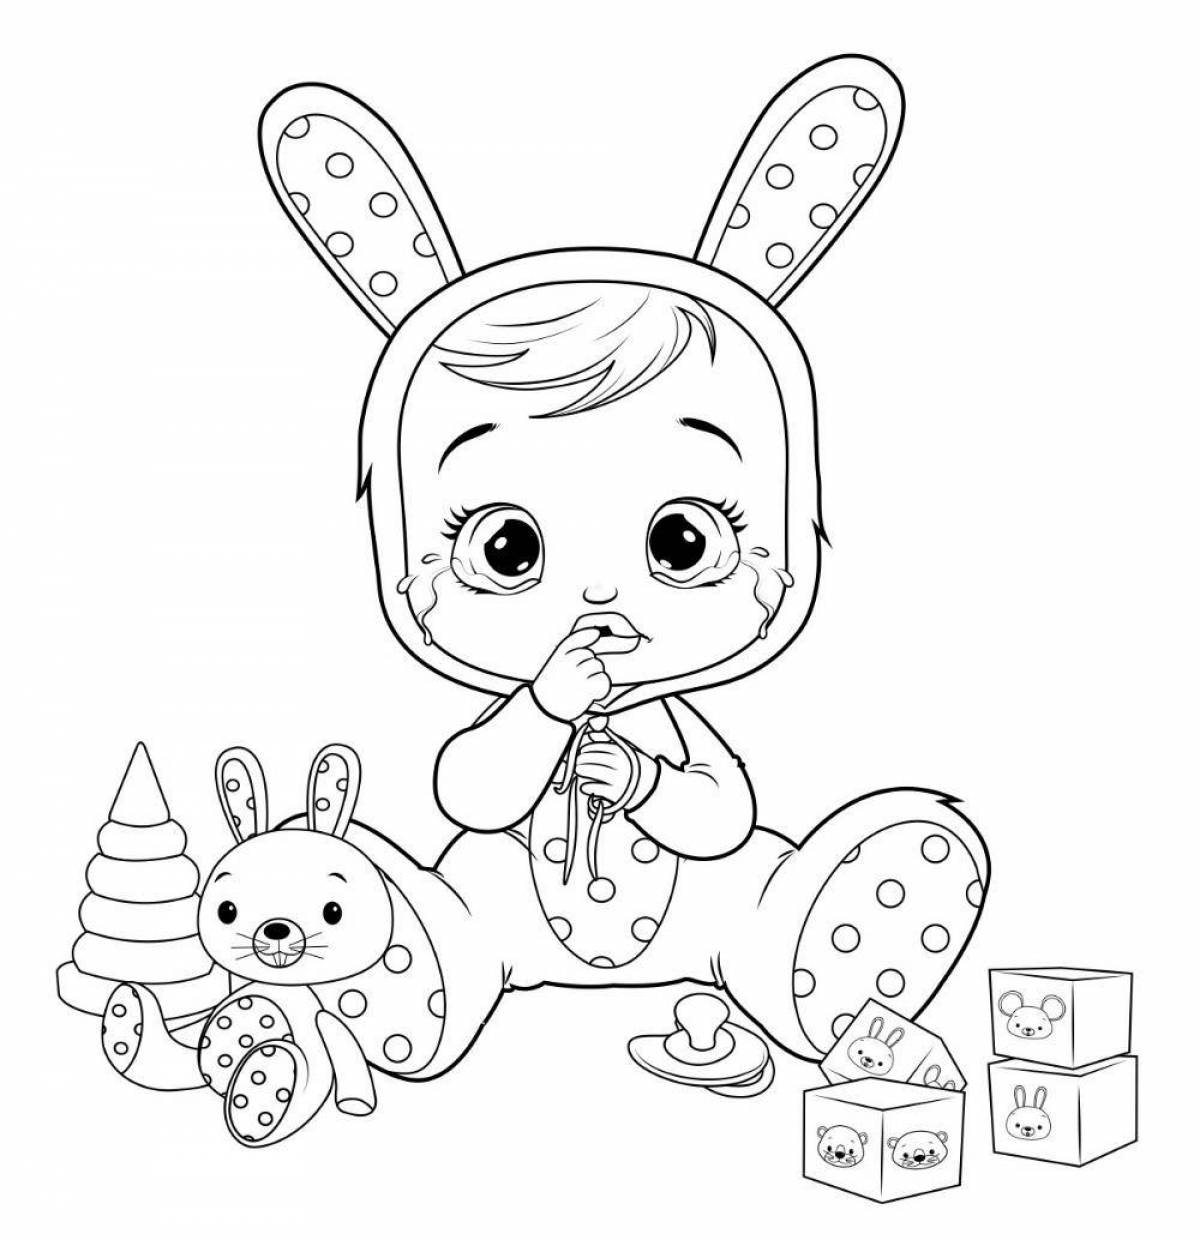 Crybaby coloring pages